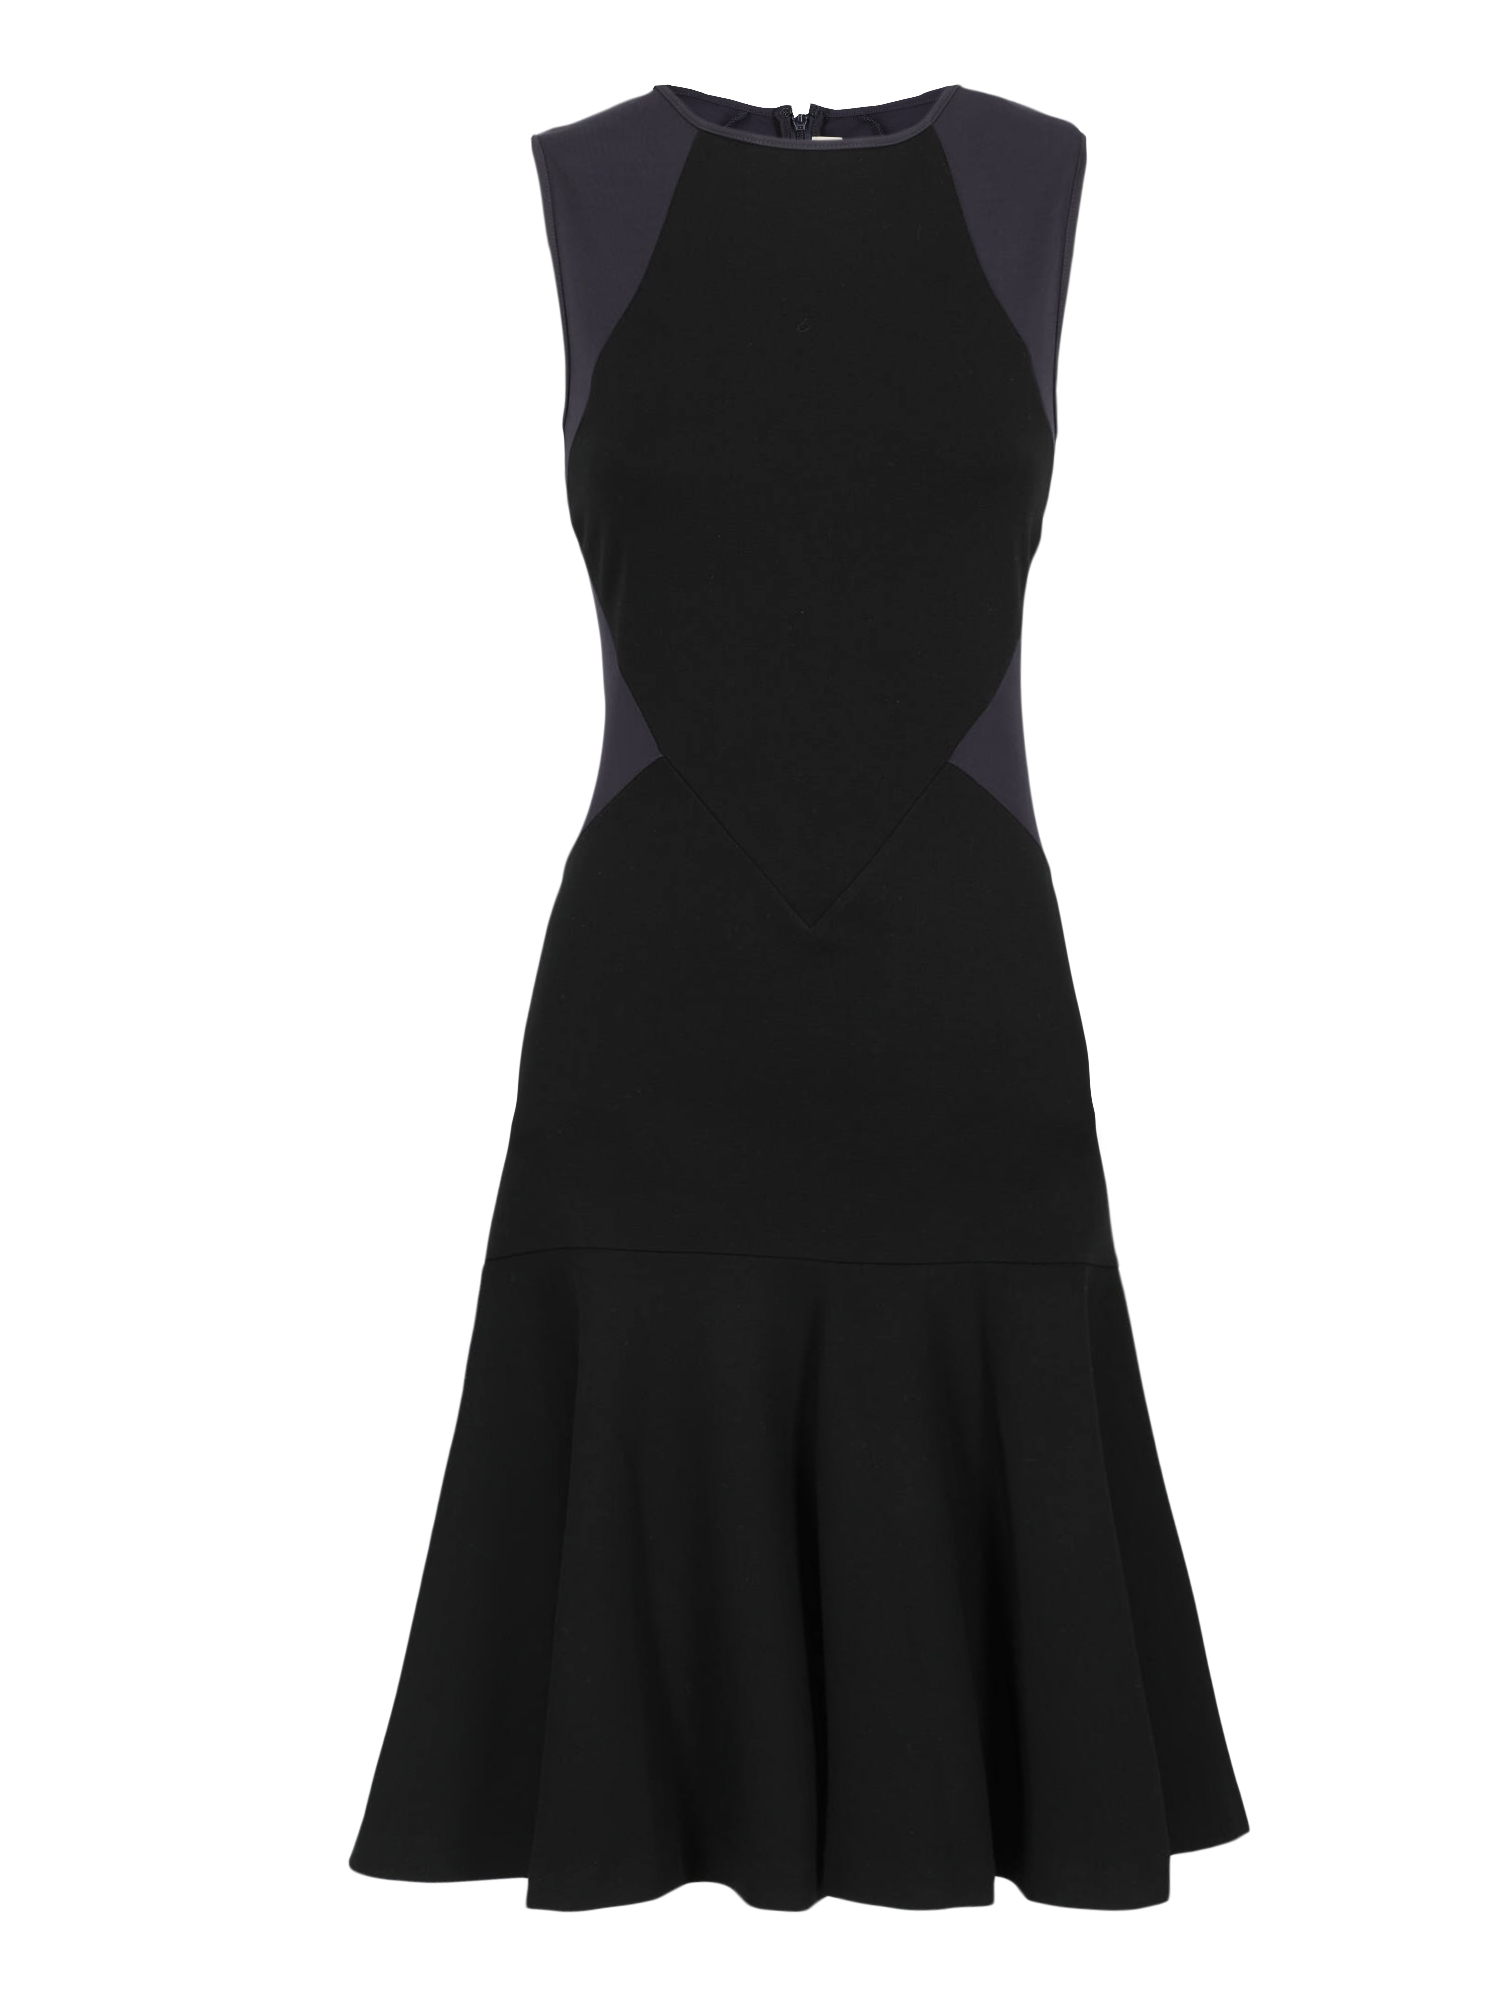 Condition: Very Good, Solid Color Synthetic Fibers, Color: Black, Navy - XS - IT 38 -